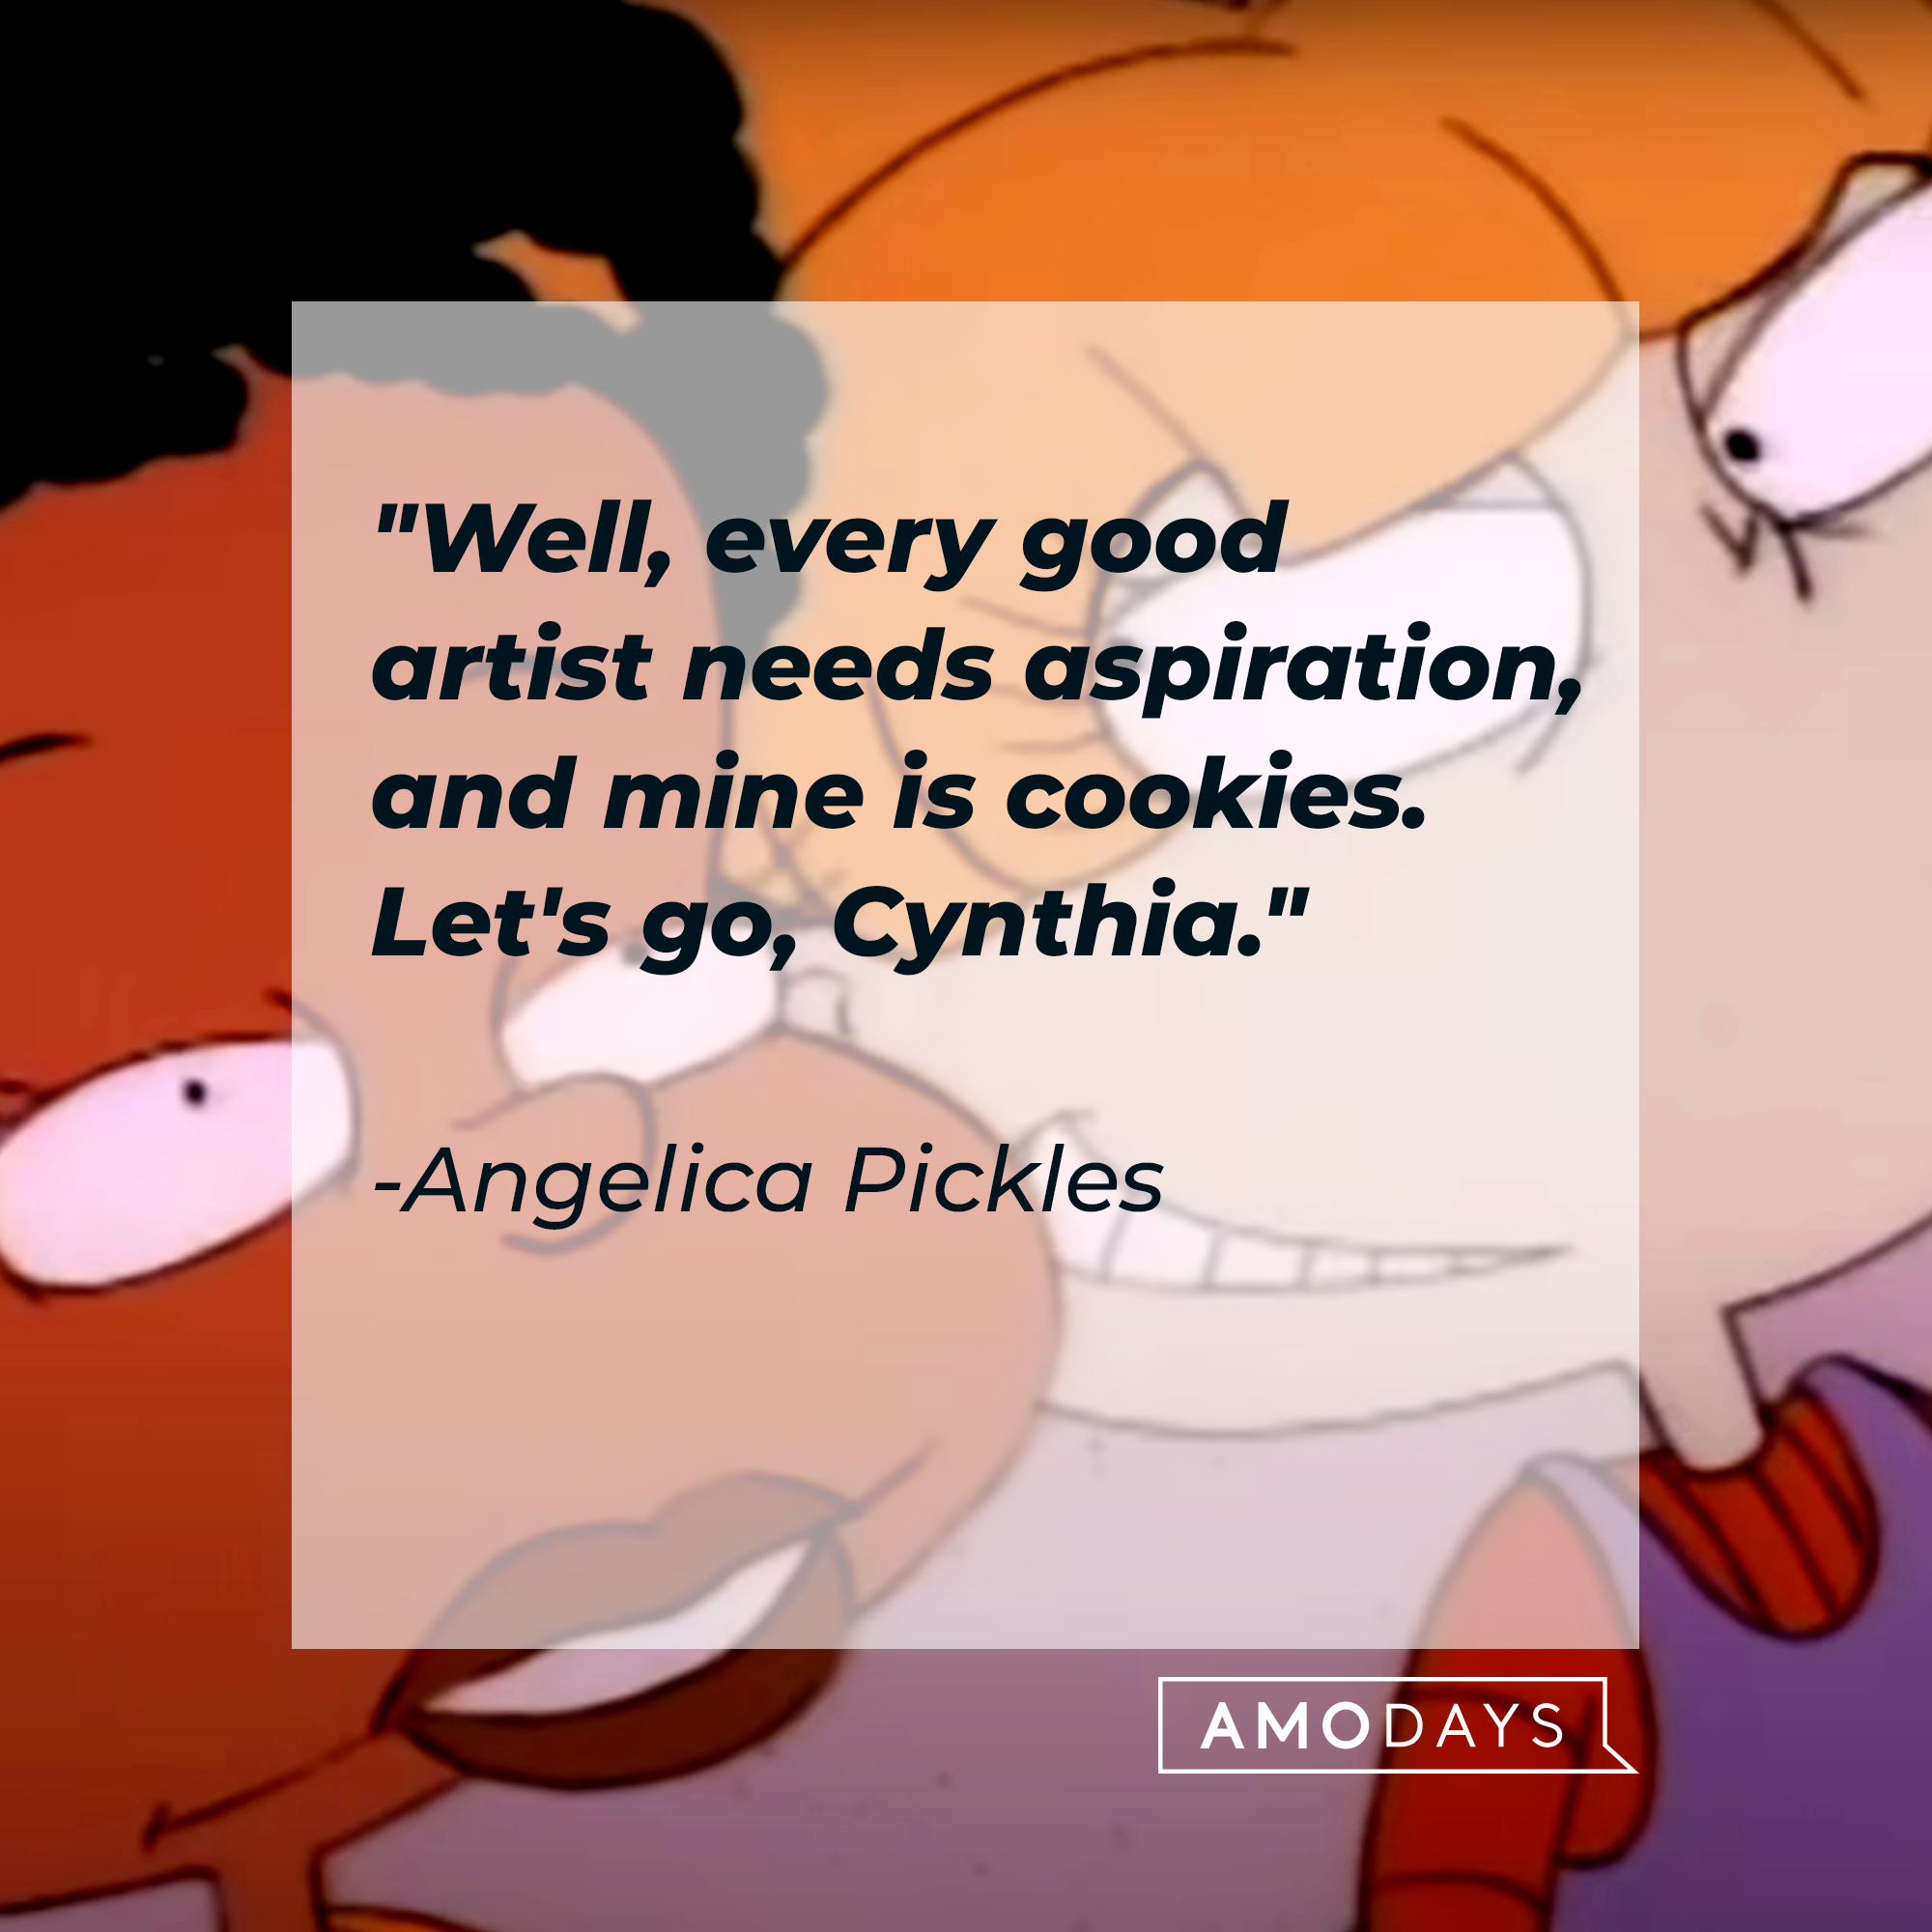 Angelica Pickles’ quote: "Well, every good artist needs aspiration, and mine is cookies. Let's go, Cynthia." | Source: Facebook/Rugrats